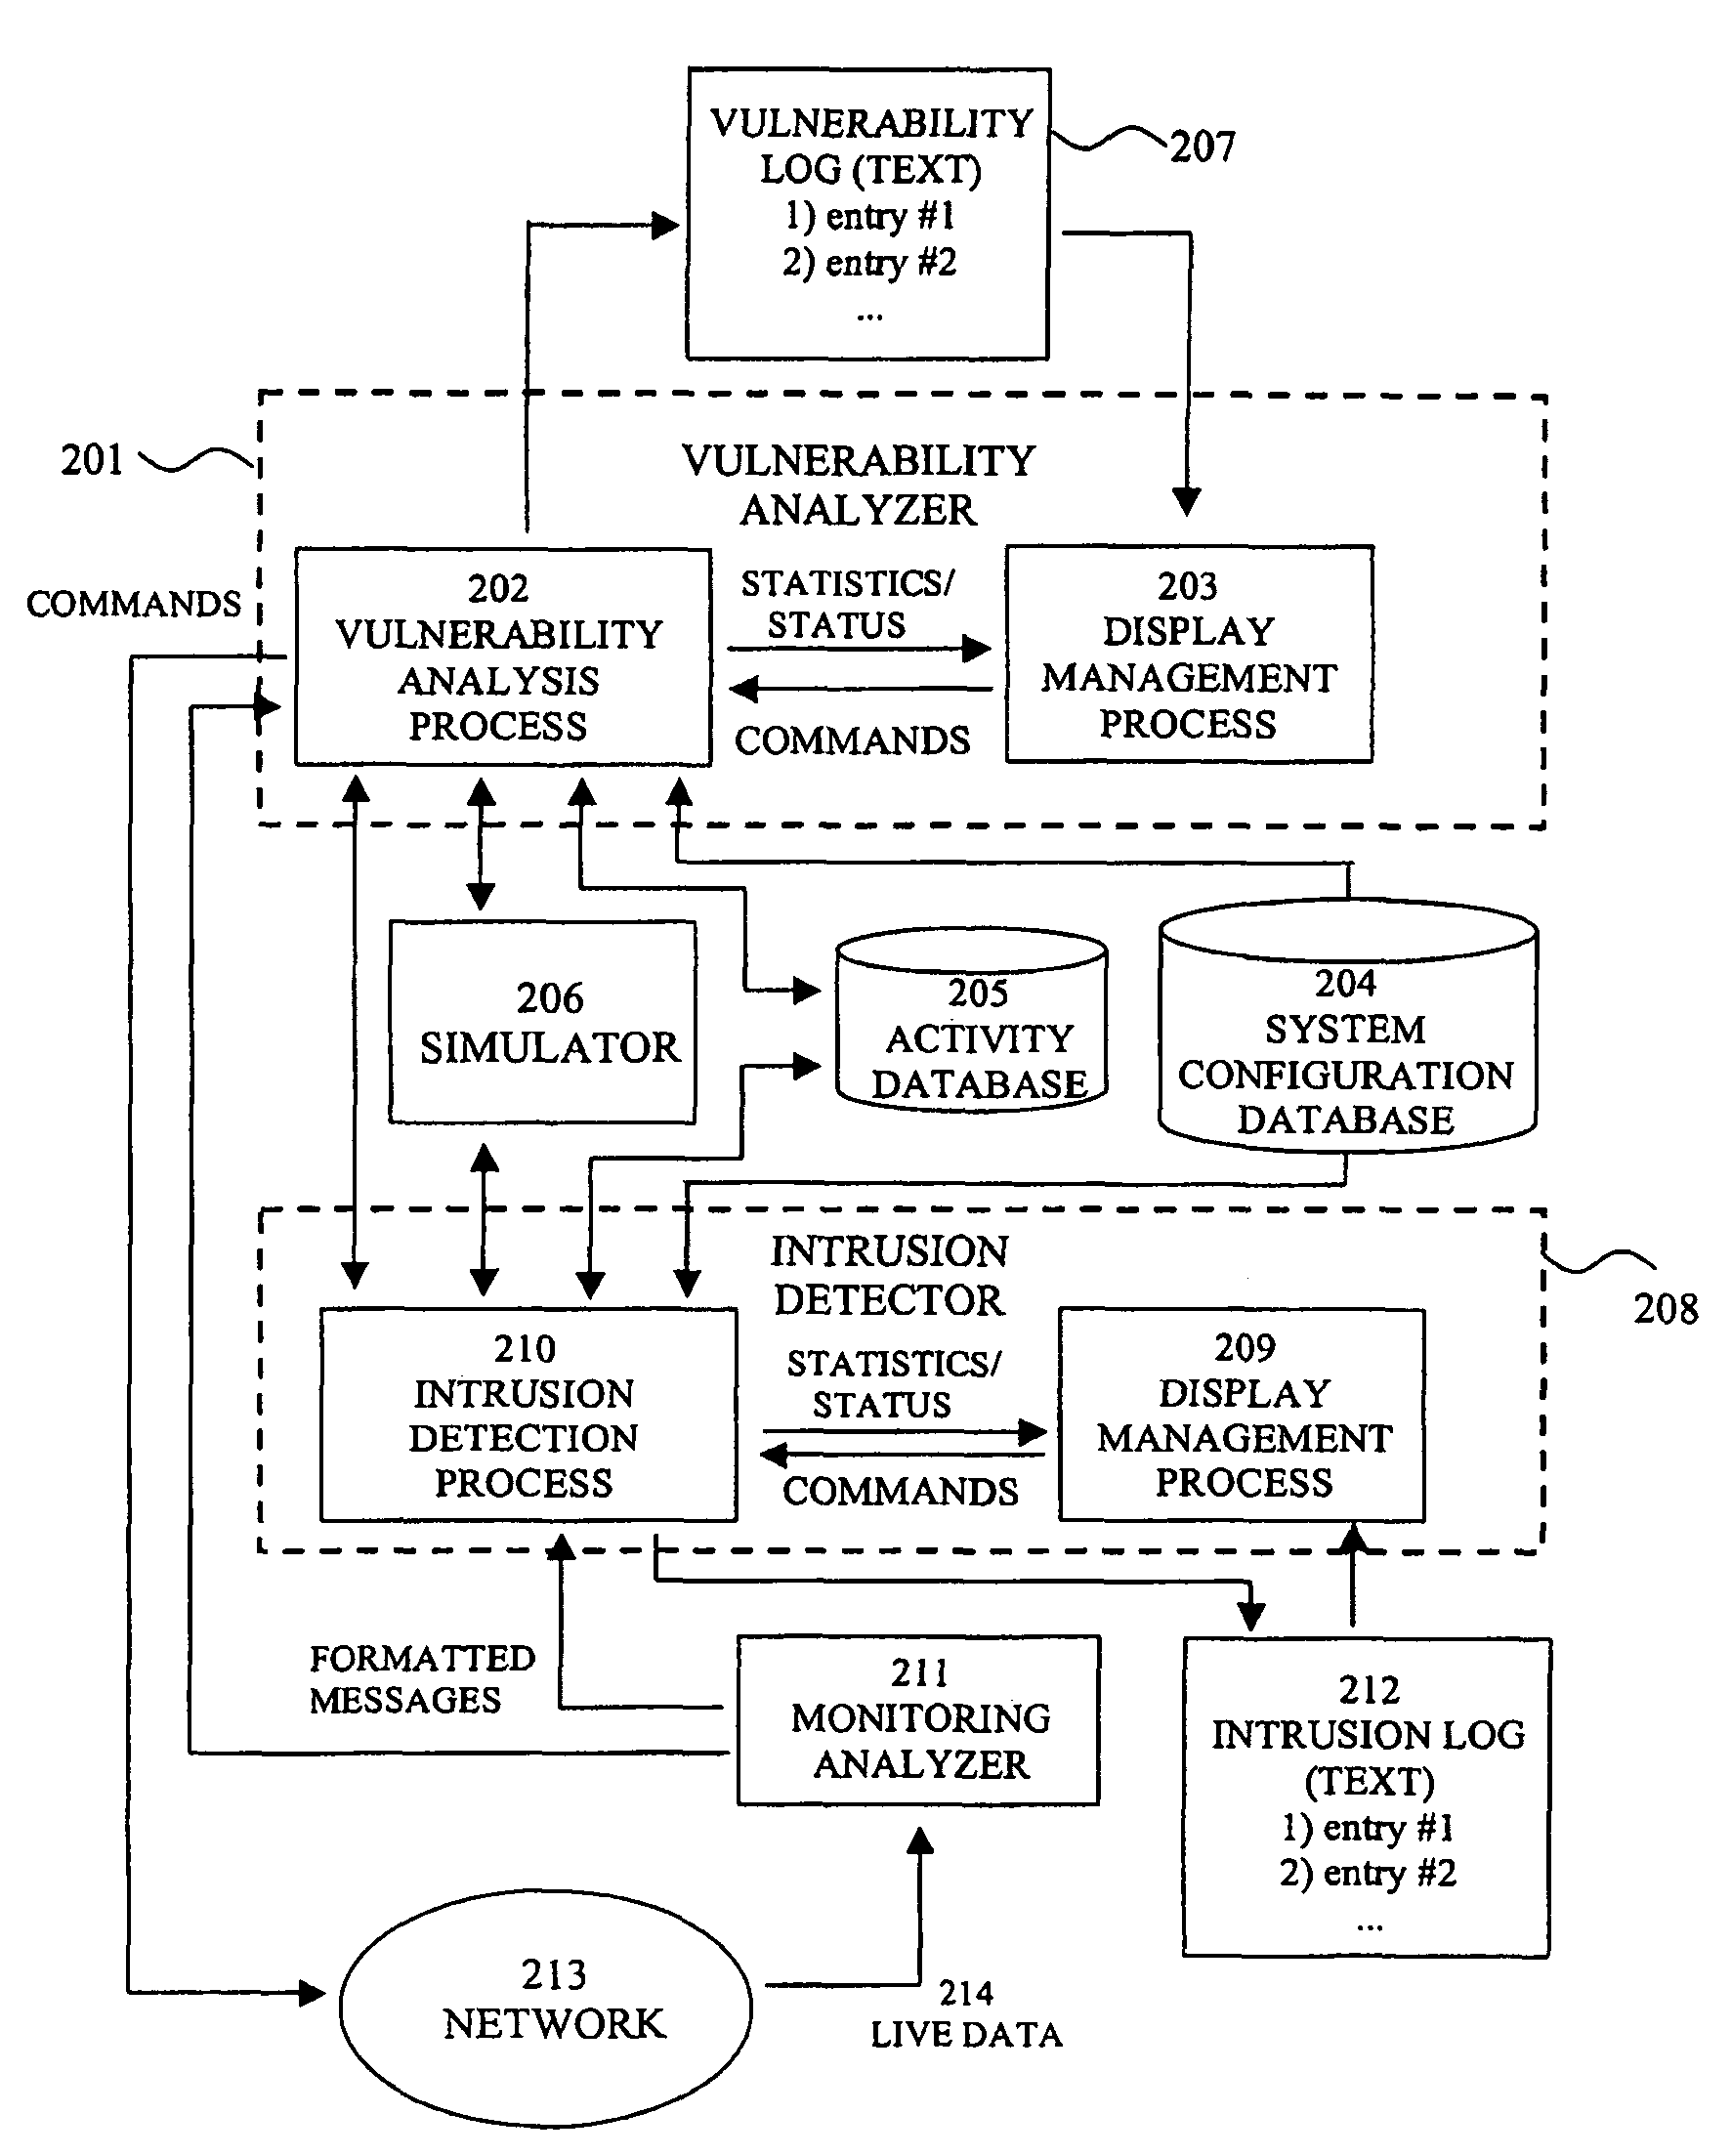 System for intrusion detection and vulnerability assessment in a computer network using simulation and machine learning